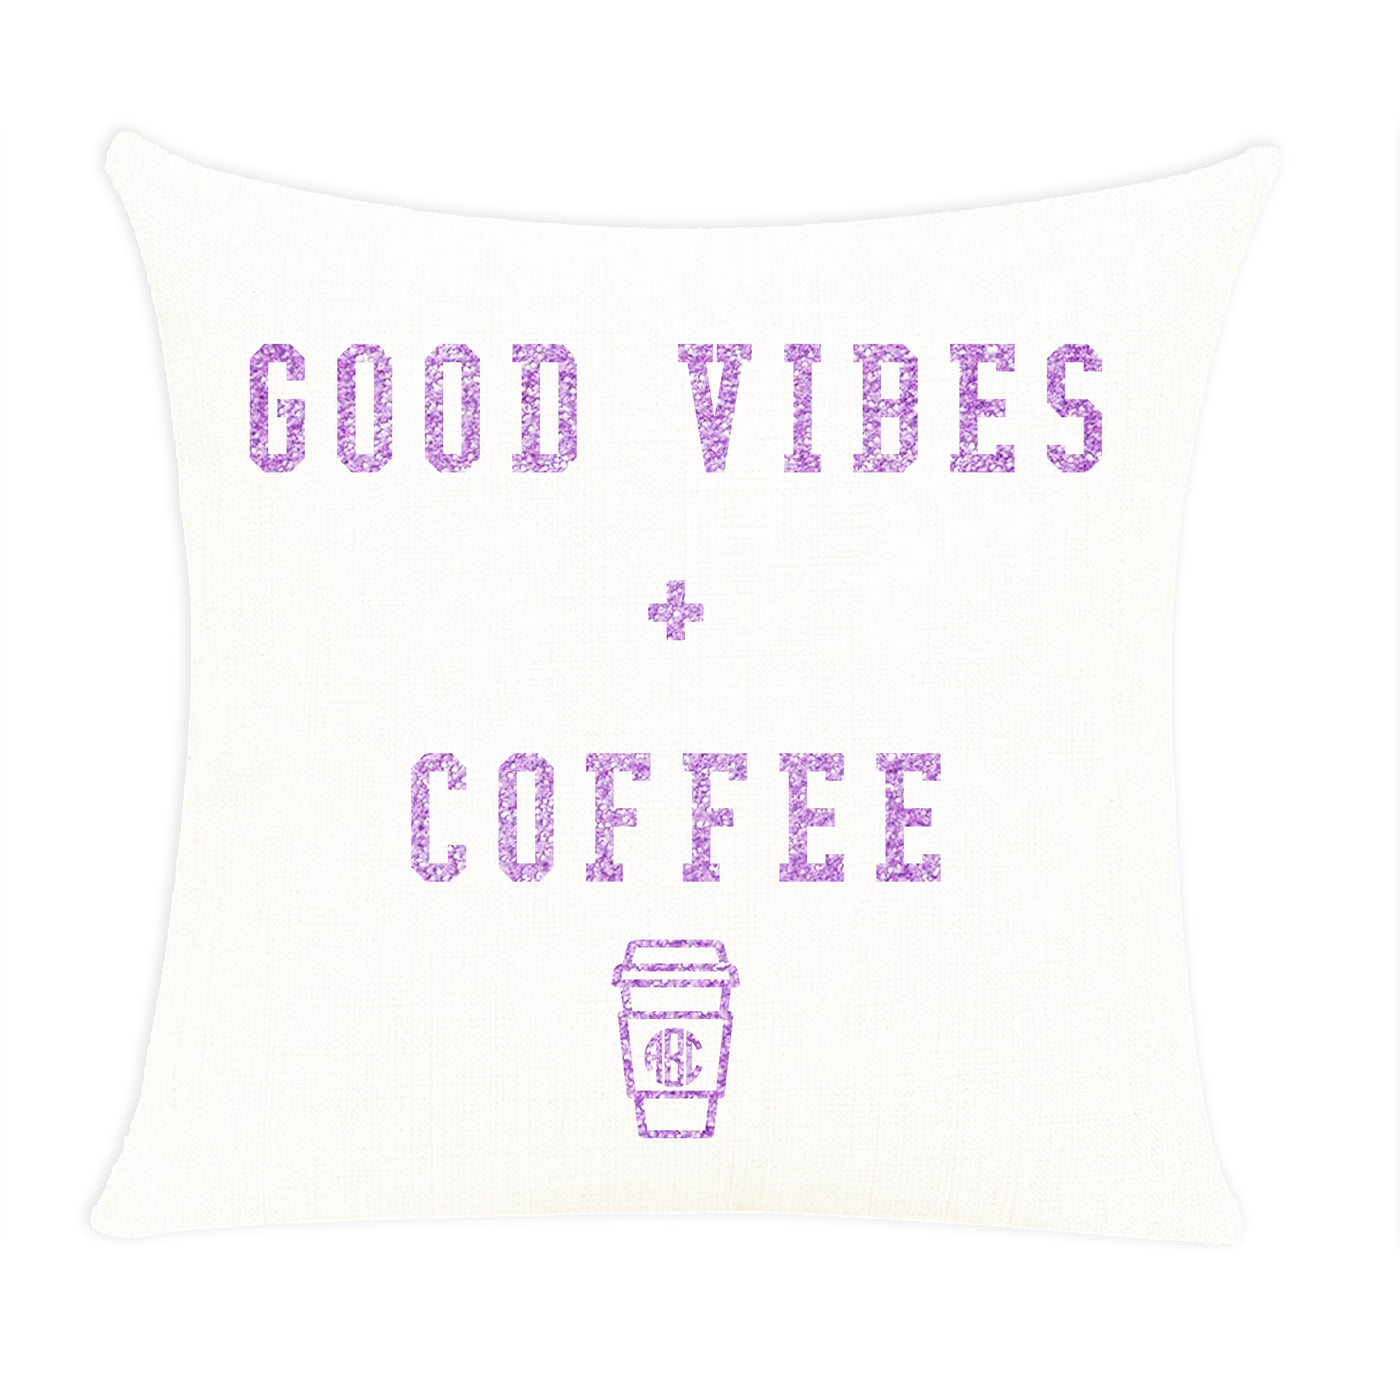 Monogrammed 'Good Vibes + Coffee' Throw Pillow